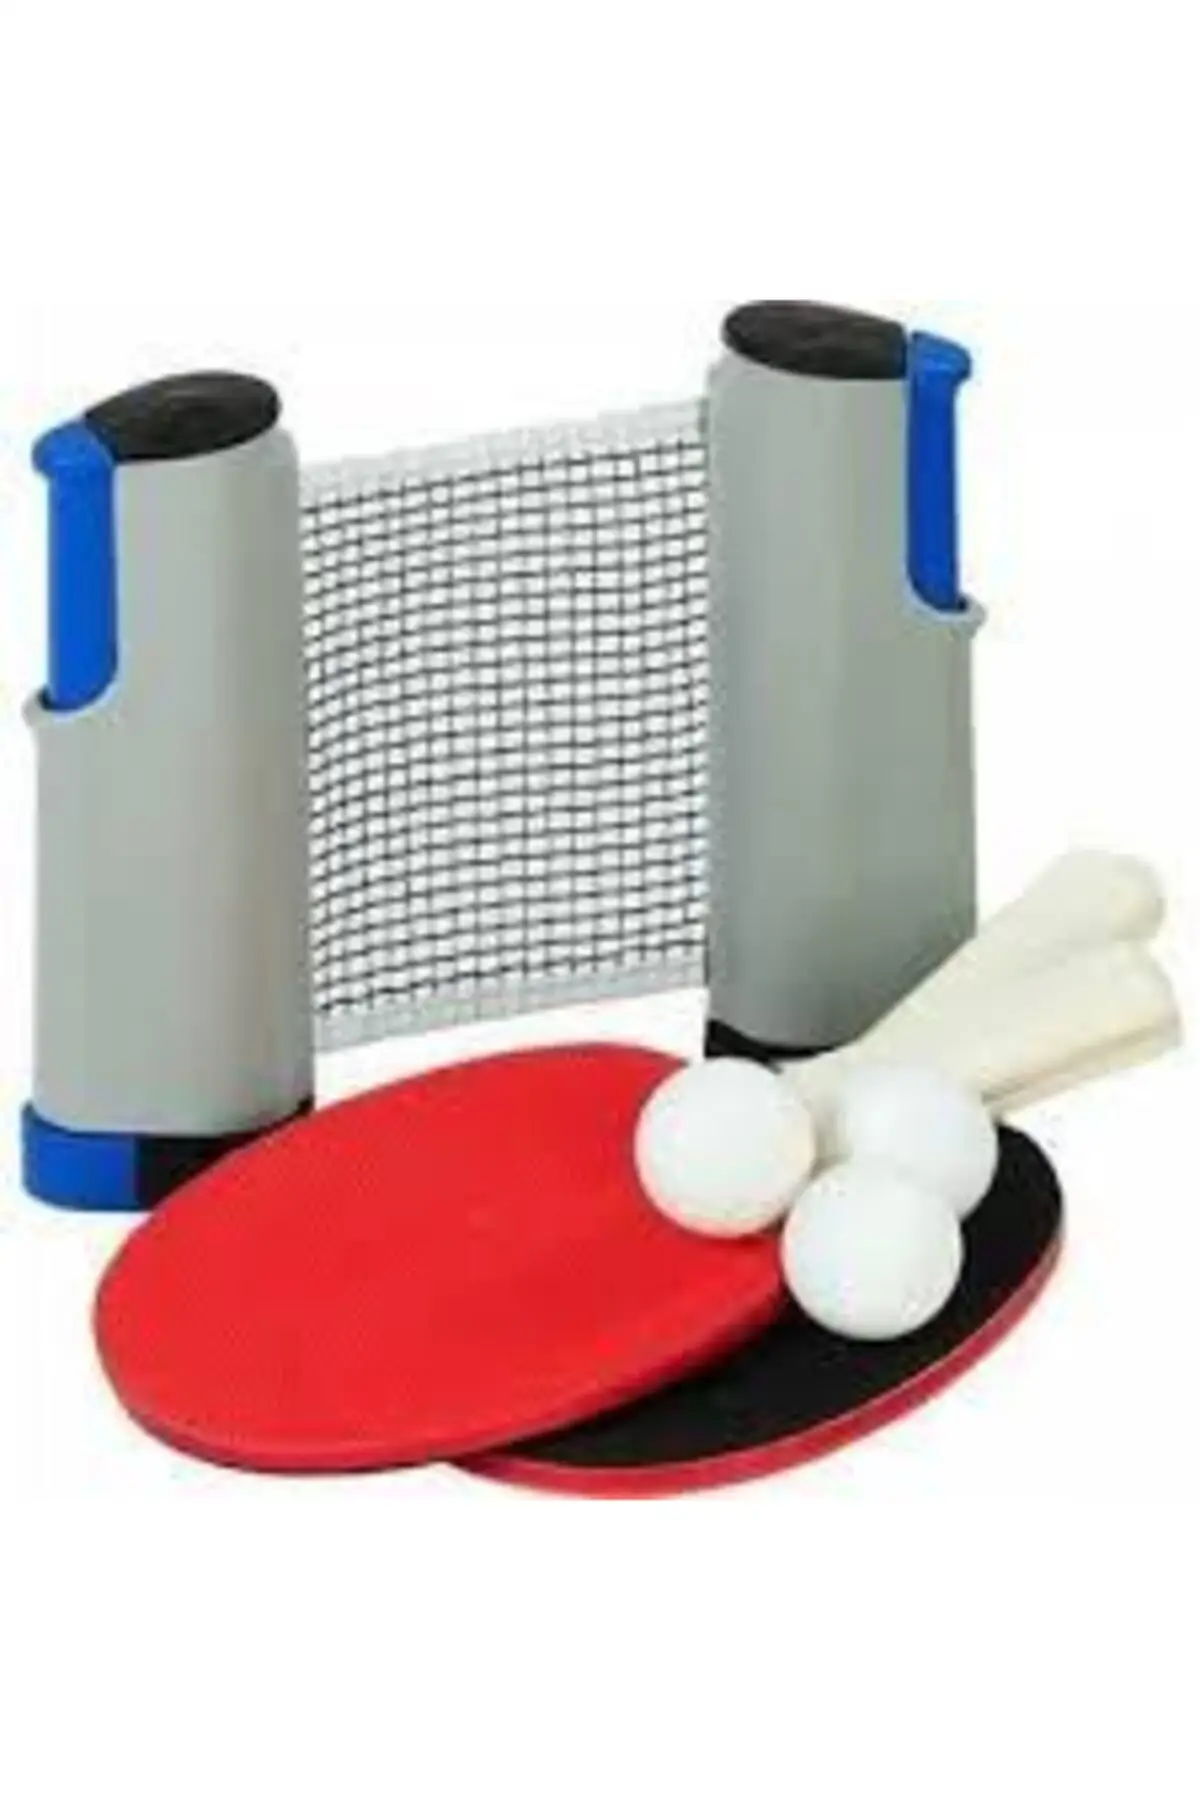 2 pieces, Racket 3 Ping-Pong Ball Easy Installation Table Tennis Net Seti Tennis Equipment & Accessory Outdoor